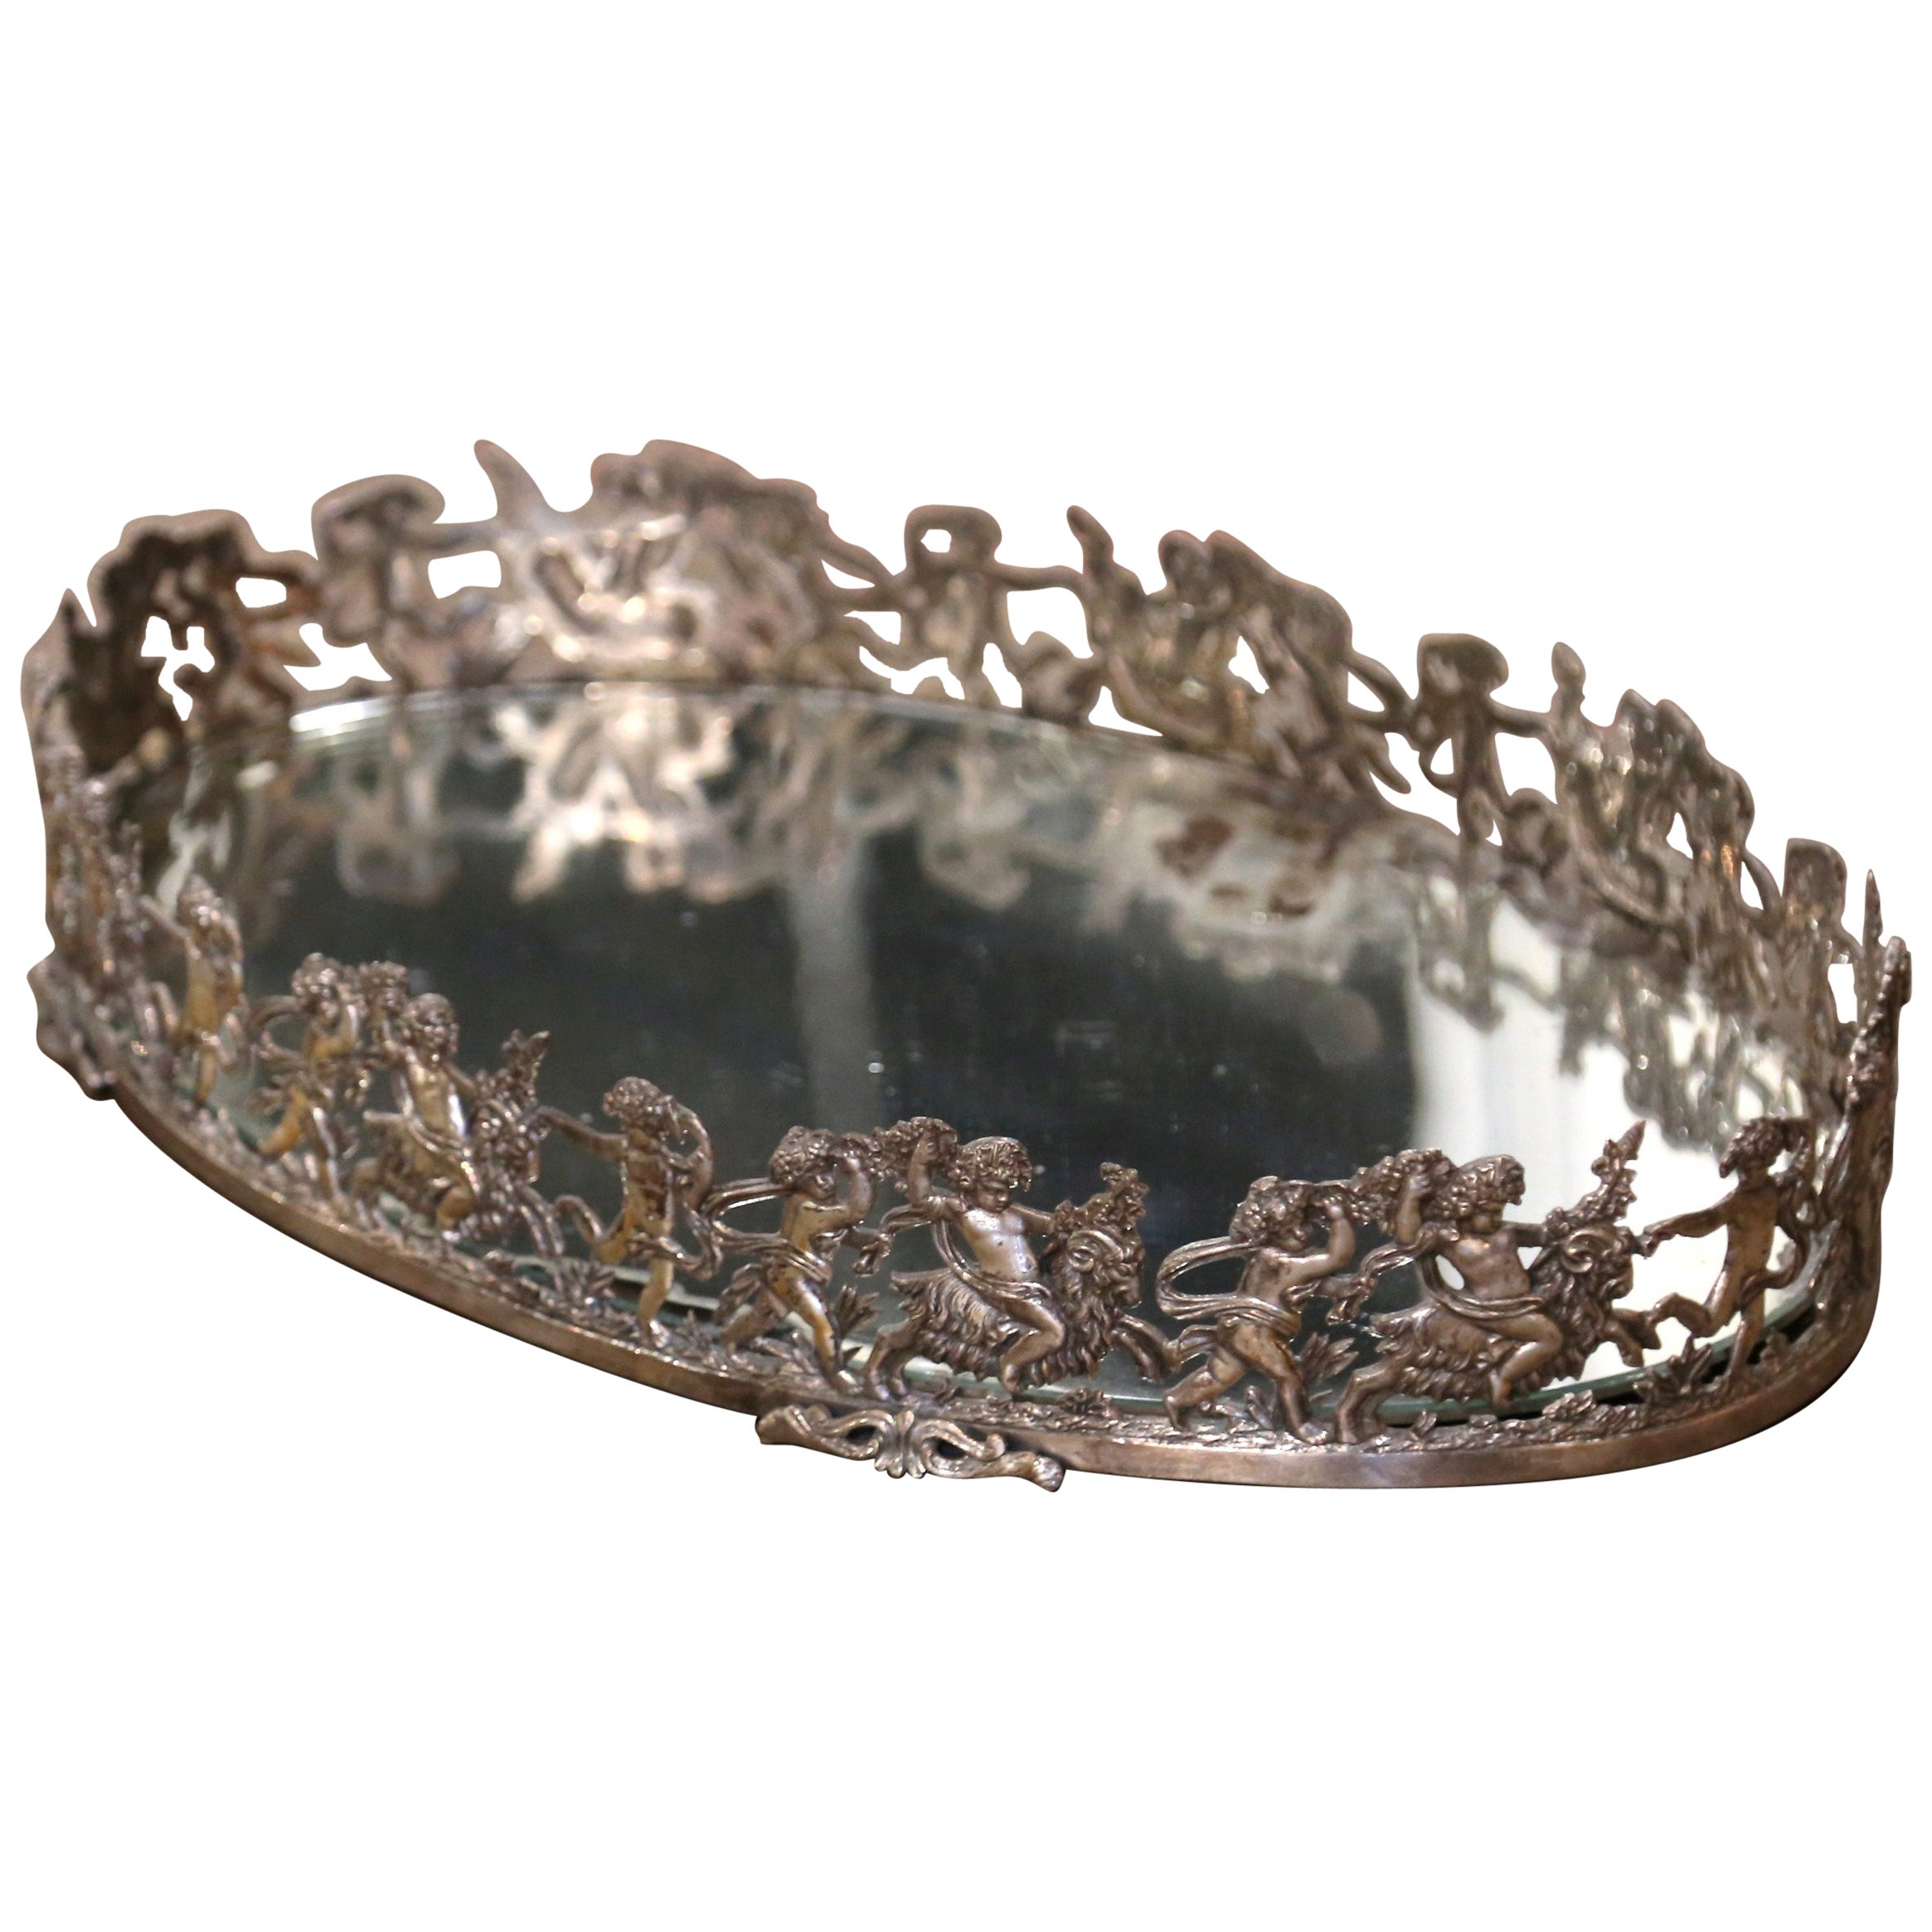  19th Century French Silvered Bronze Mirrored "Surtout de Table" with Cherubs For Sale